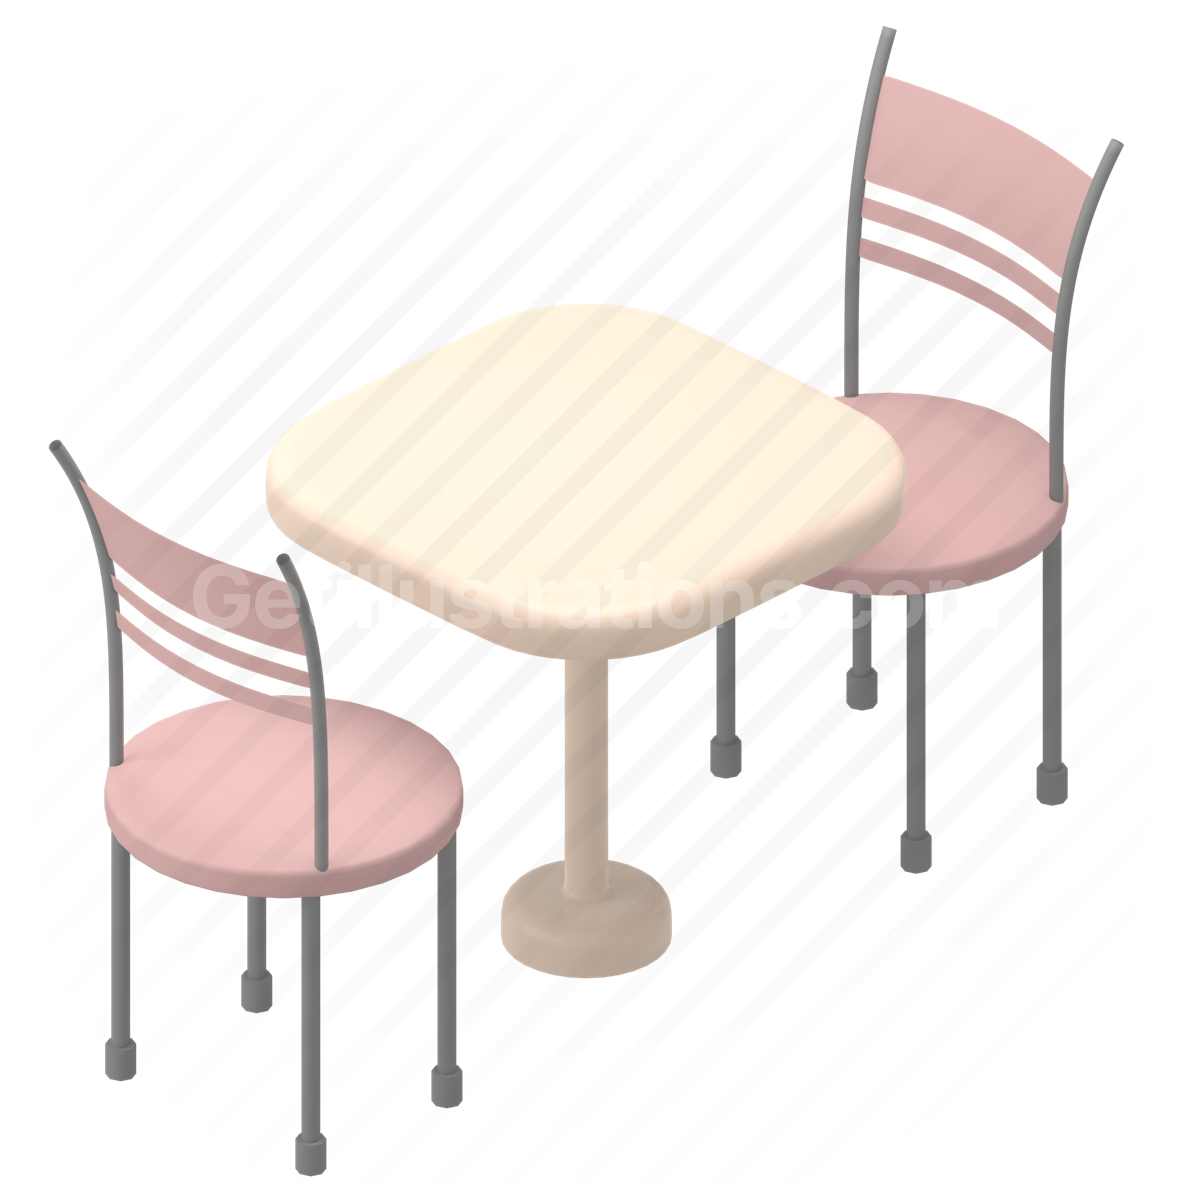 table, cafe, chair, chairs, dining